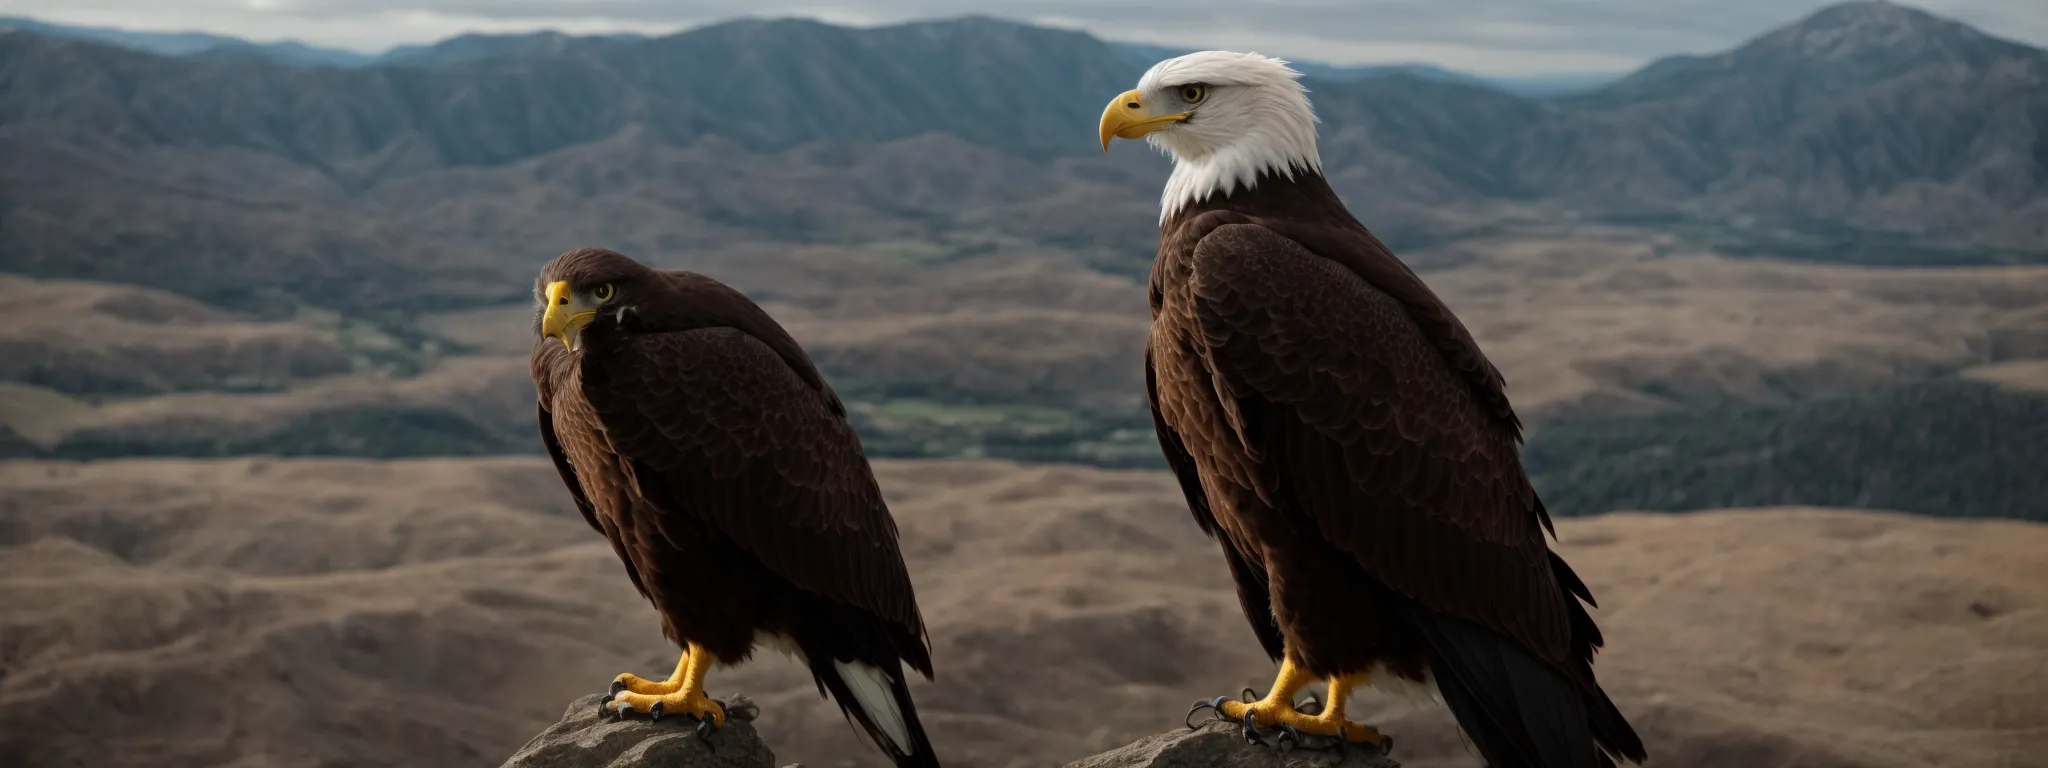 a cautious eagle perched on a high vantage point, surveying the landscape below for any signs of danger.